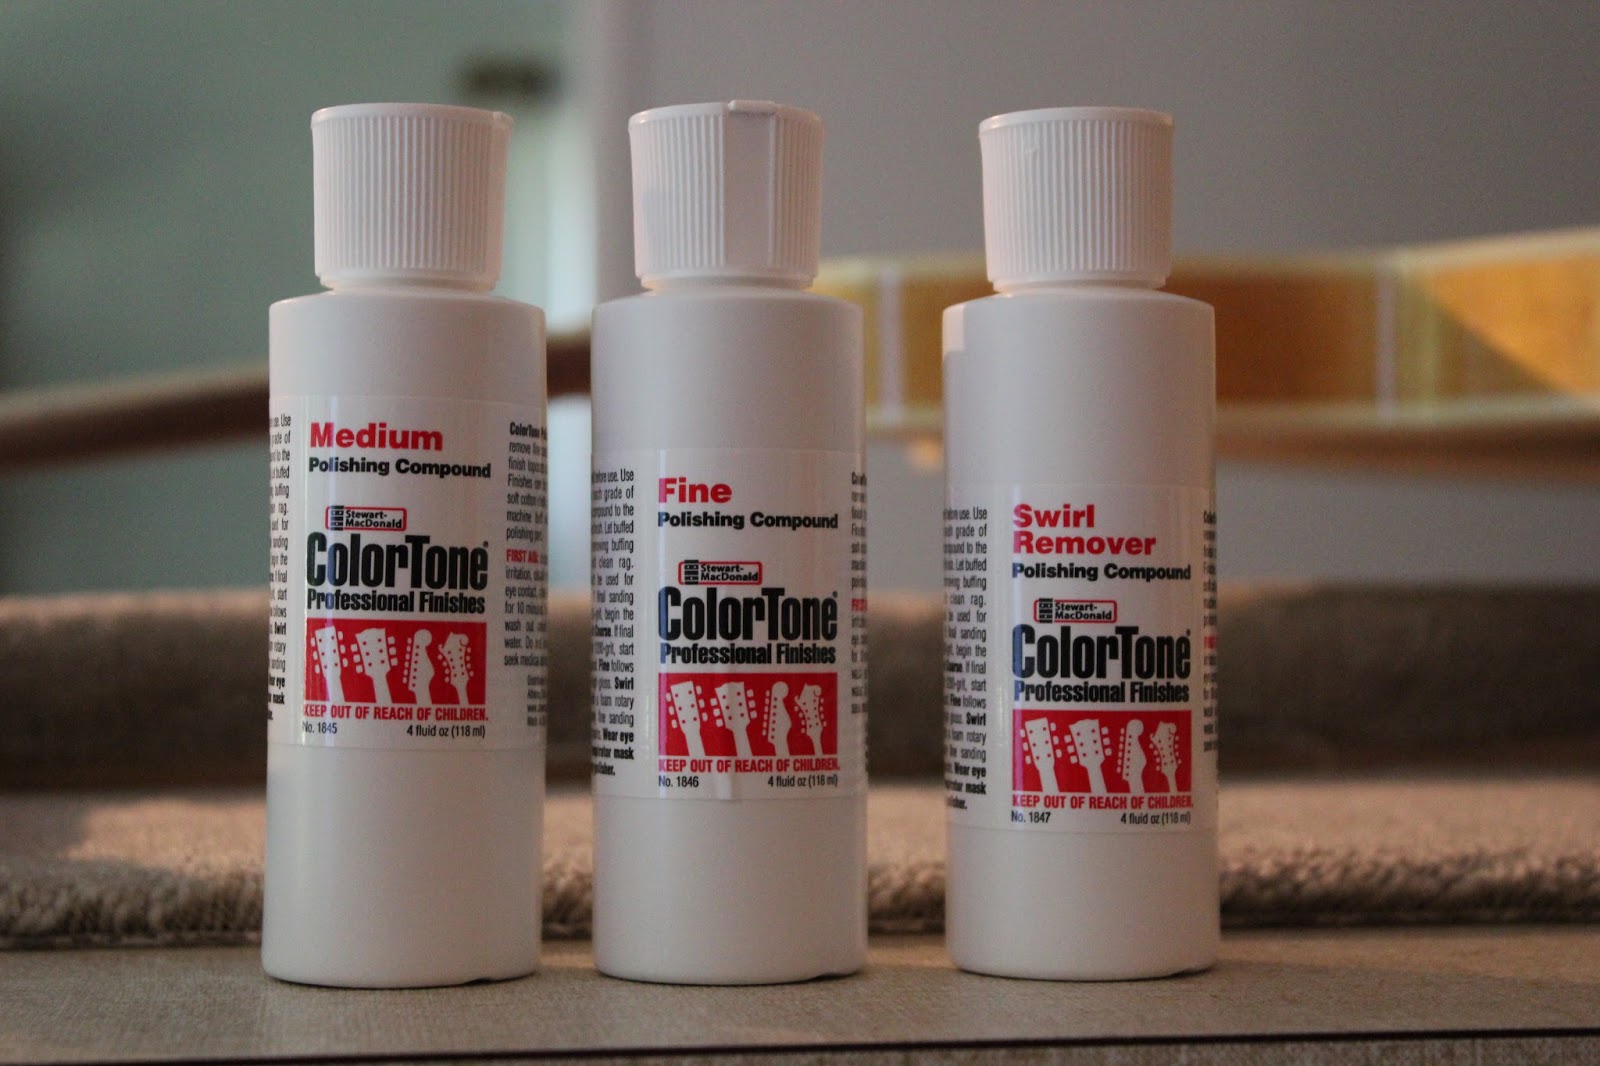 ColorTone Buffing Compounds, Extra-fine